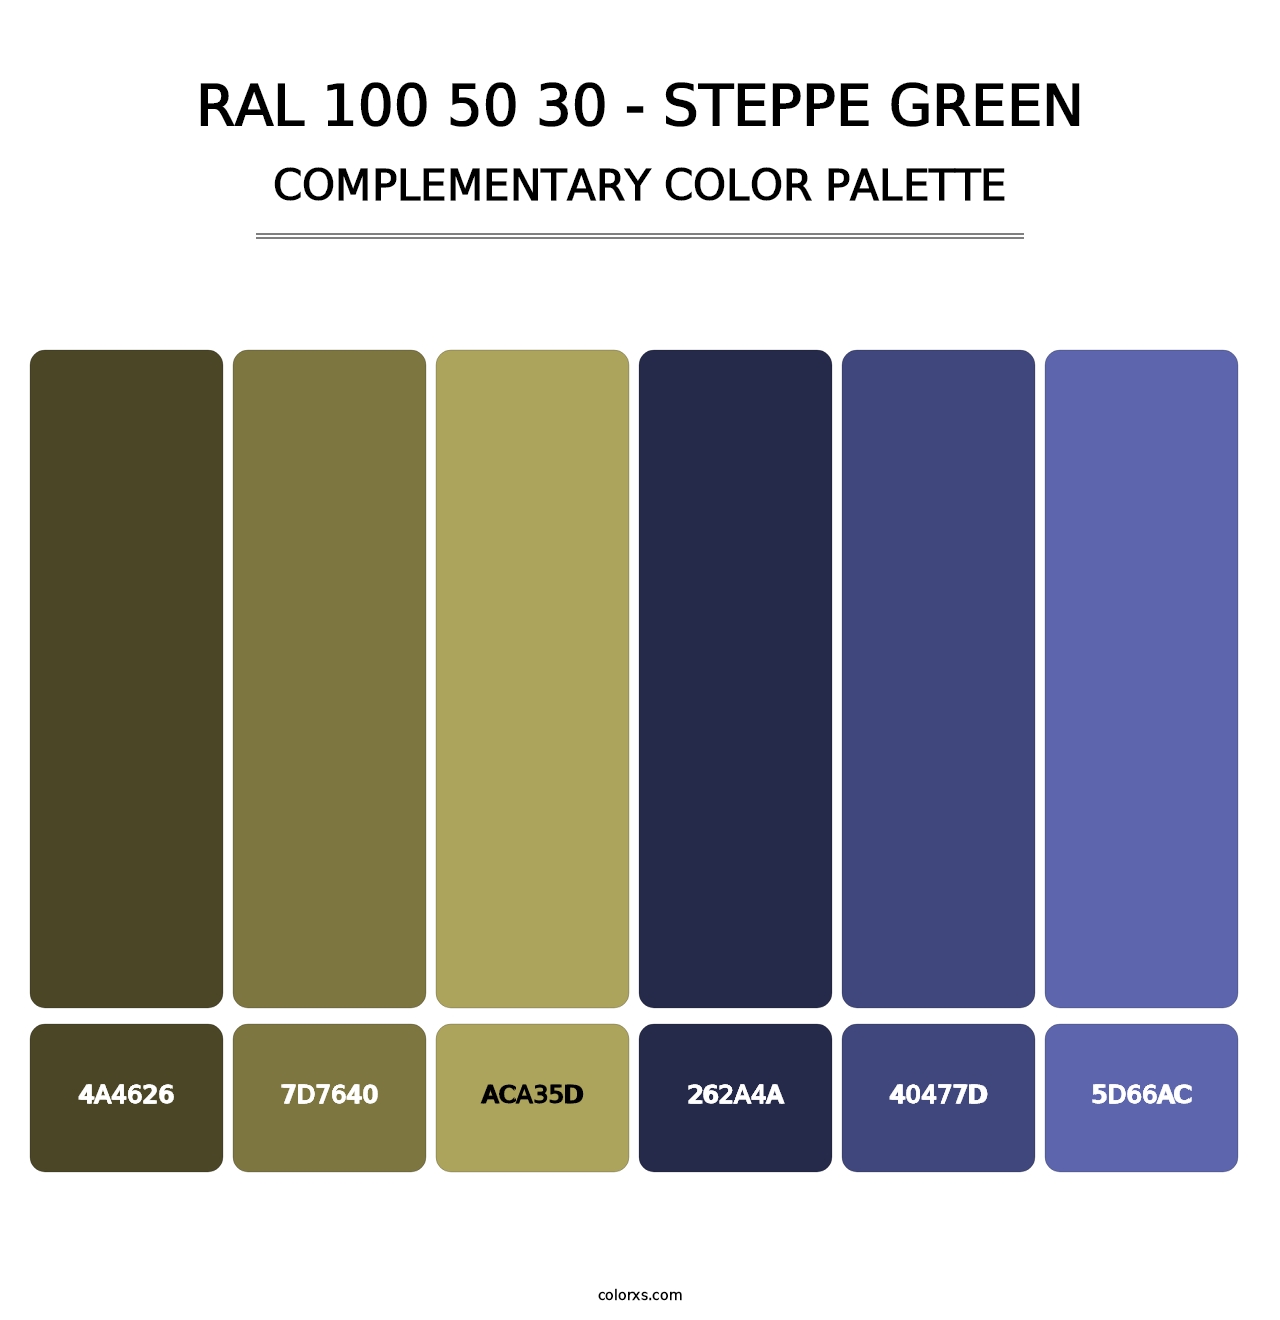 RAL 100 50 30 - Steppe Green - Complementary Color Palette